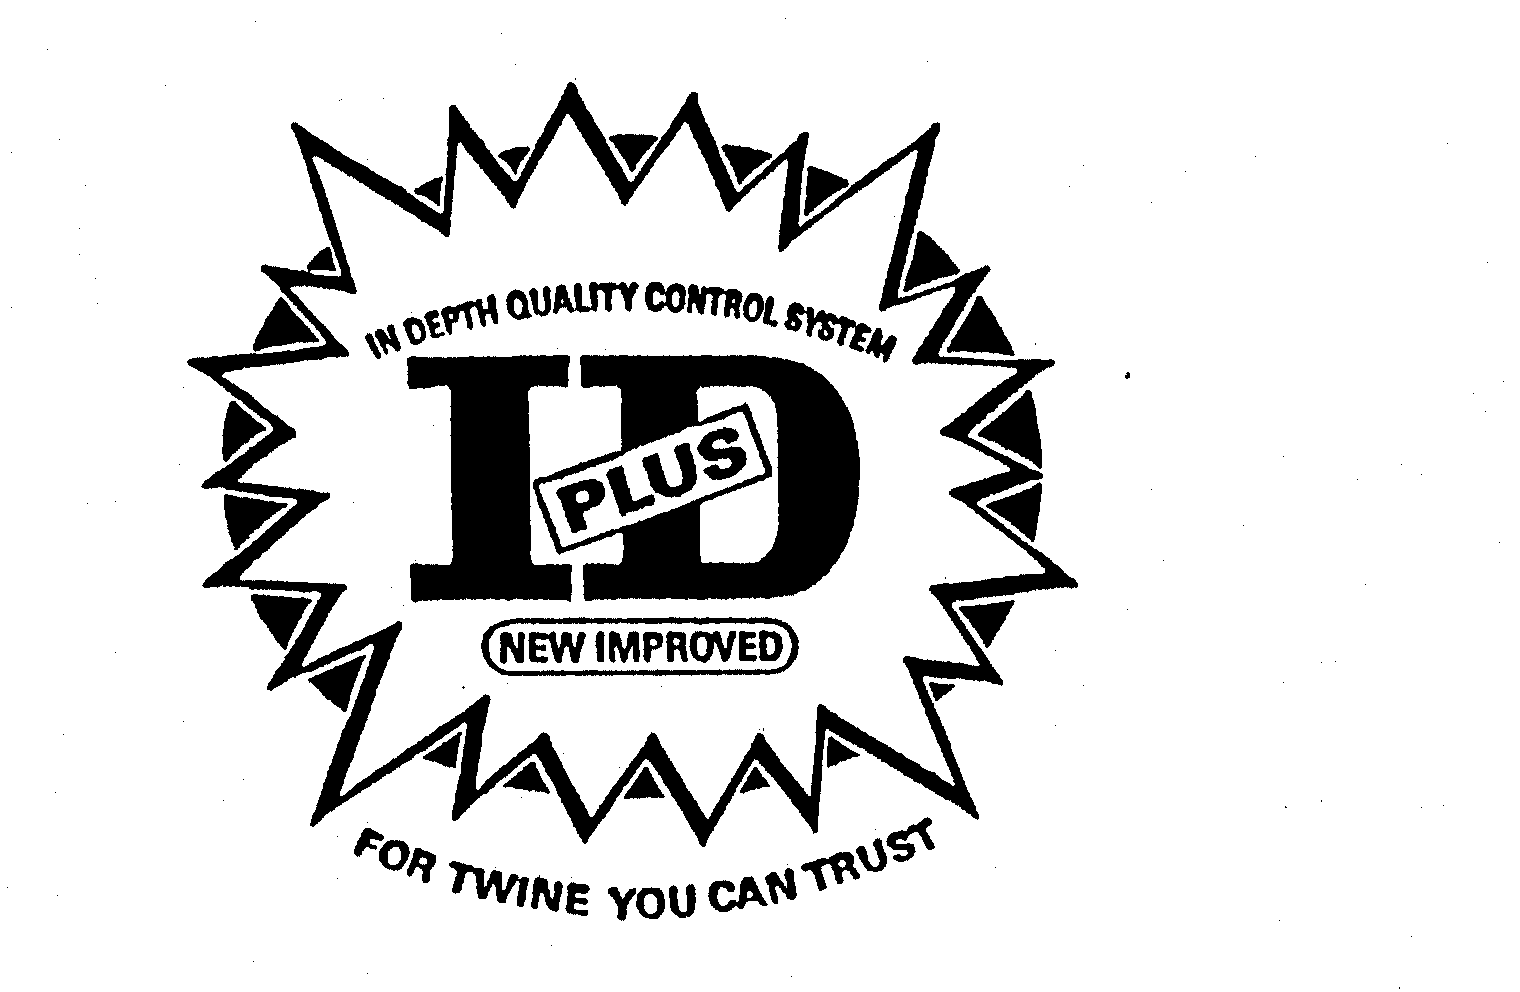  ID PLUS IN DEPTH QUALITY CONTROL SYSTEM FOR TWINE YOU CAN TRUST